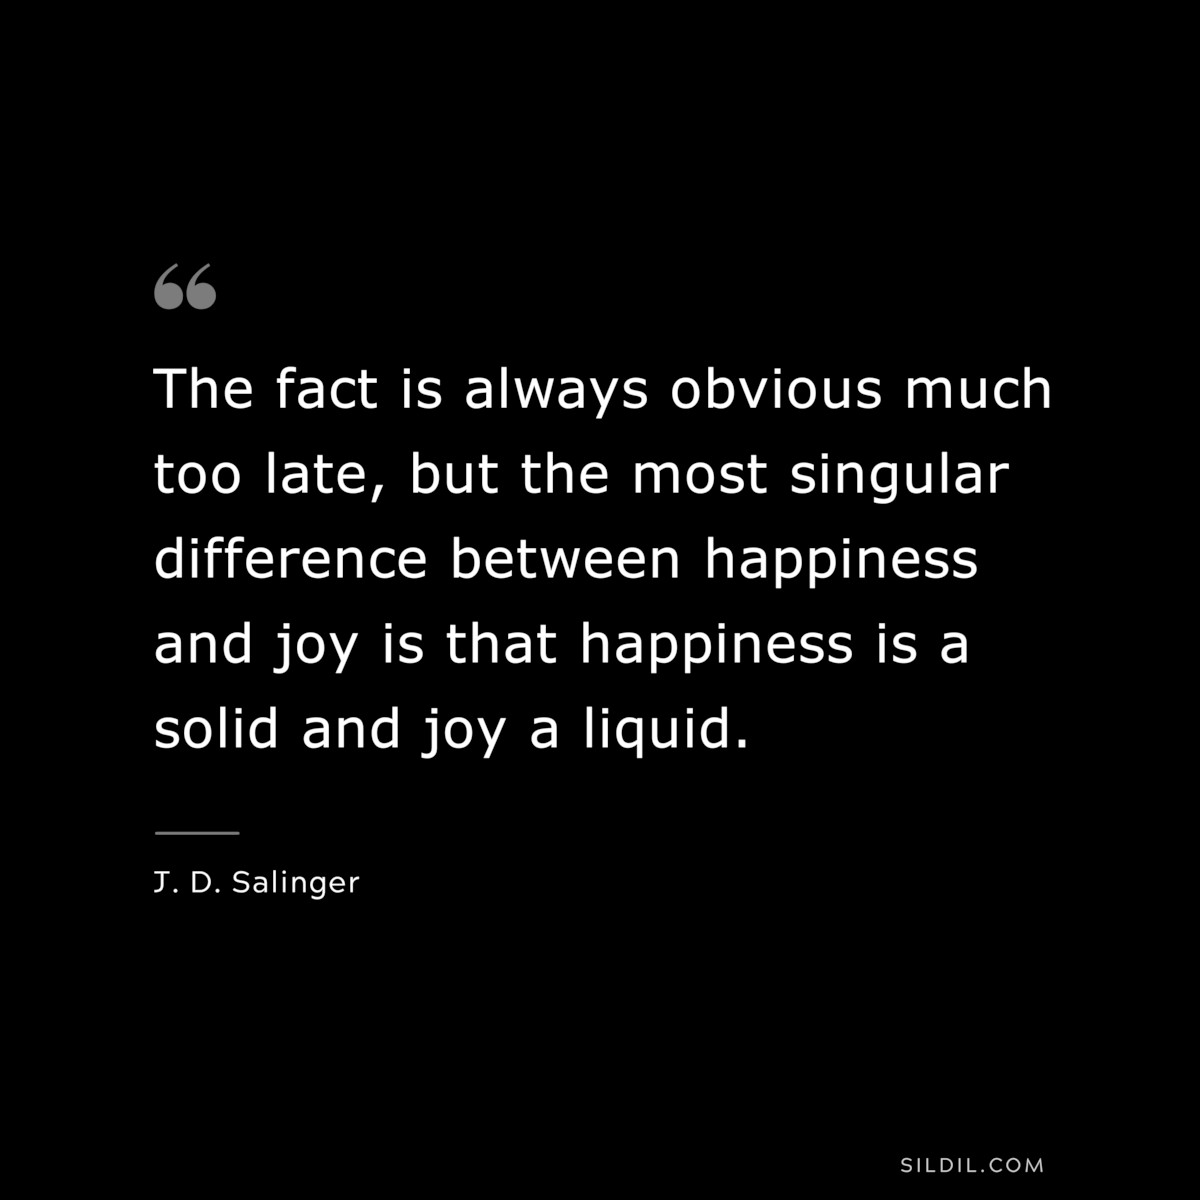 The fact is always obvious much too late, but the most singular difference between happiness and joy is that happiness is a solid and joy a liquid. — J. D. Salinger